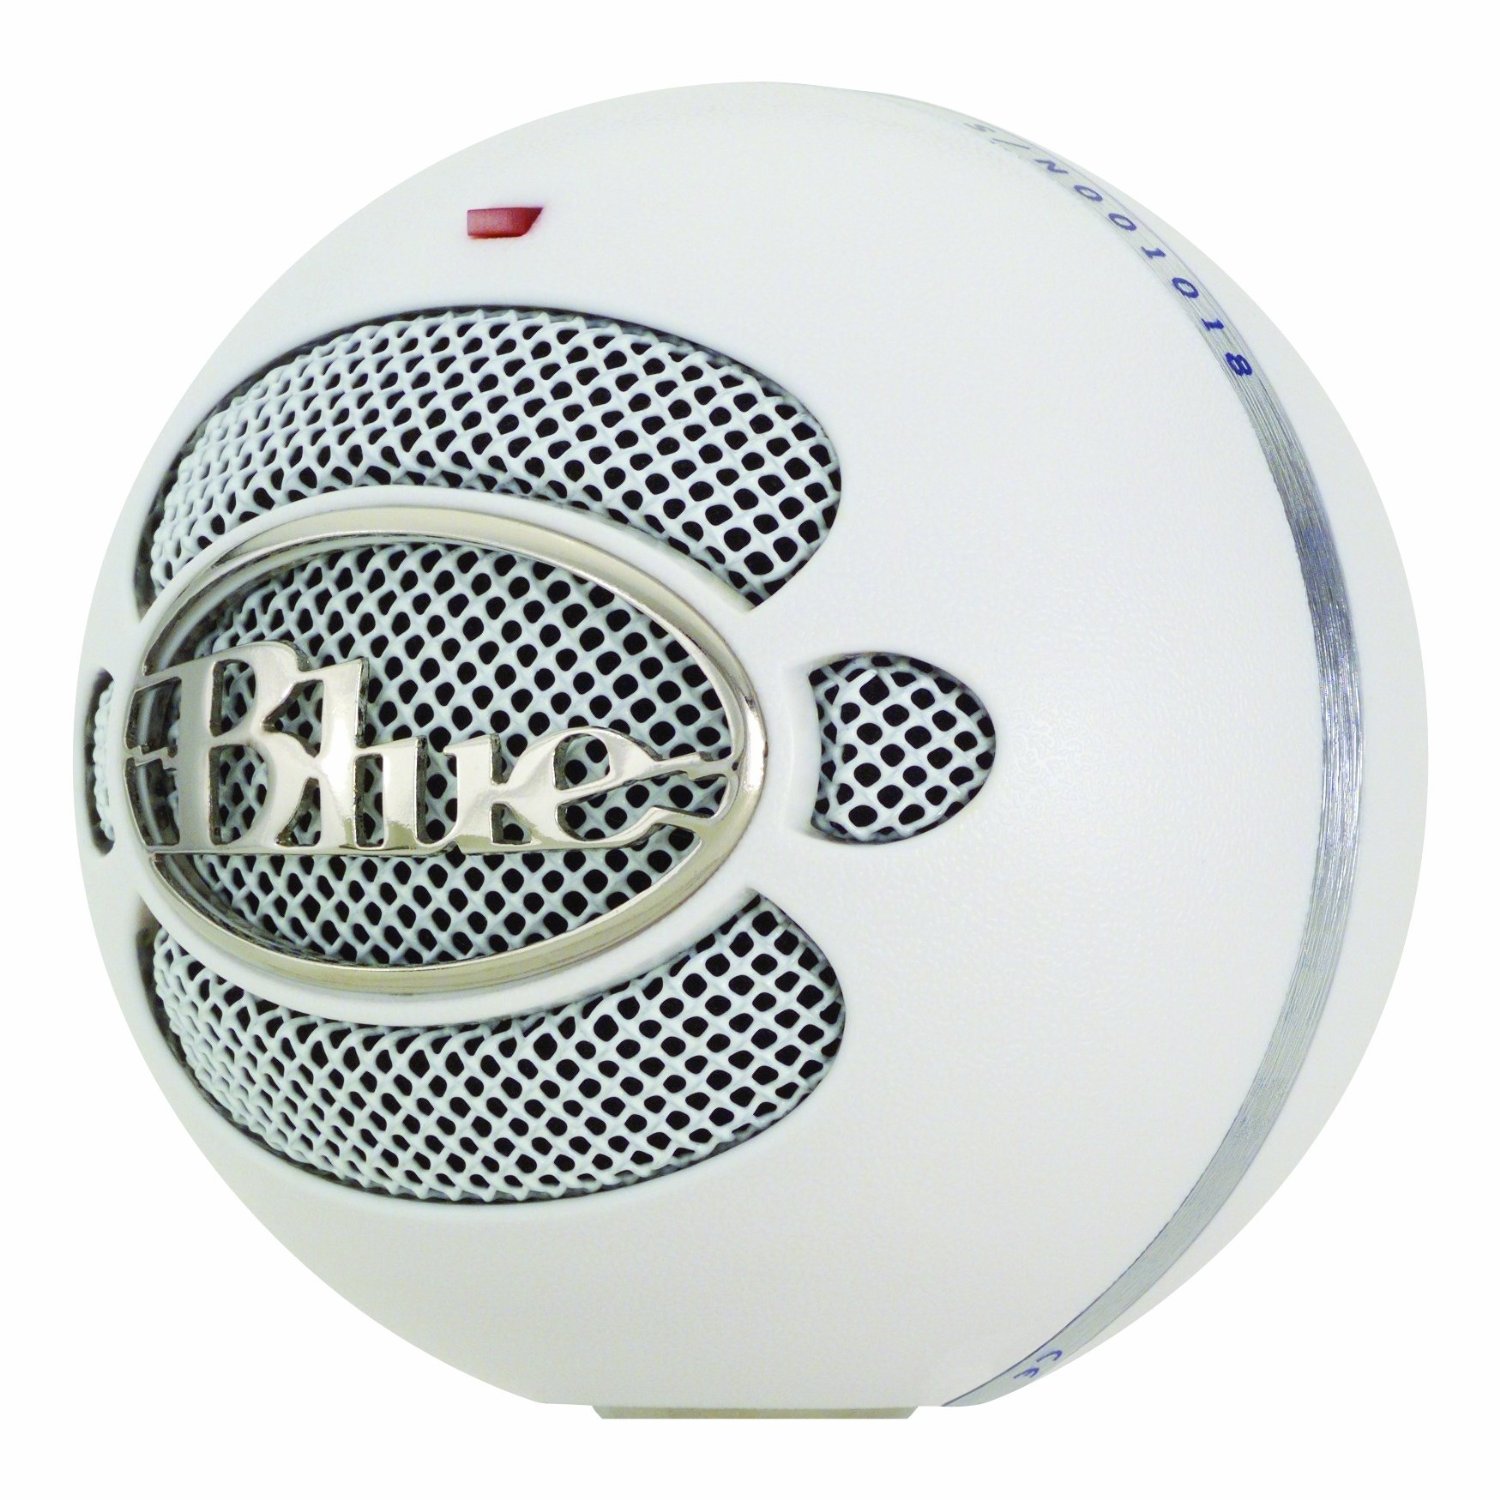 http://thetechjournal.com/wp-content/uploads/images/1110/1318233938-blue-microphones-snowball-usb-microphone-5.jpg